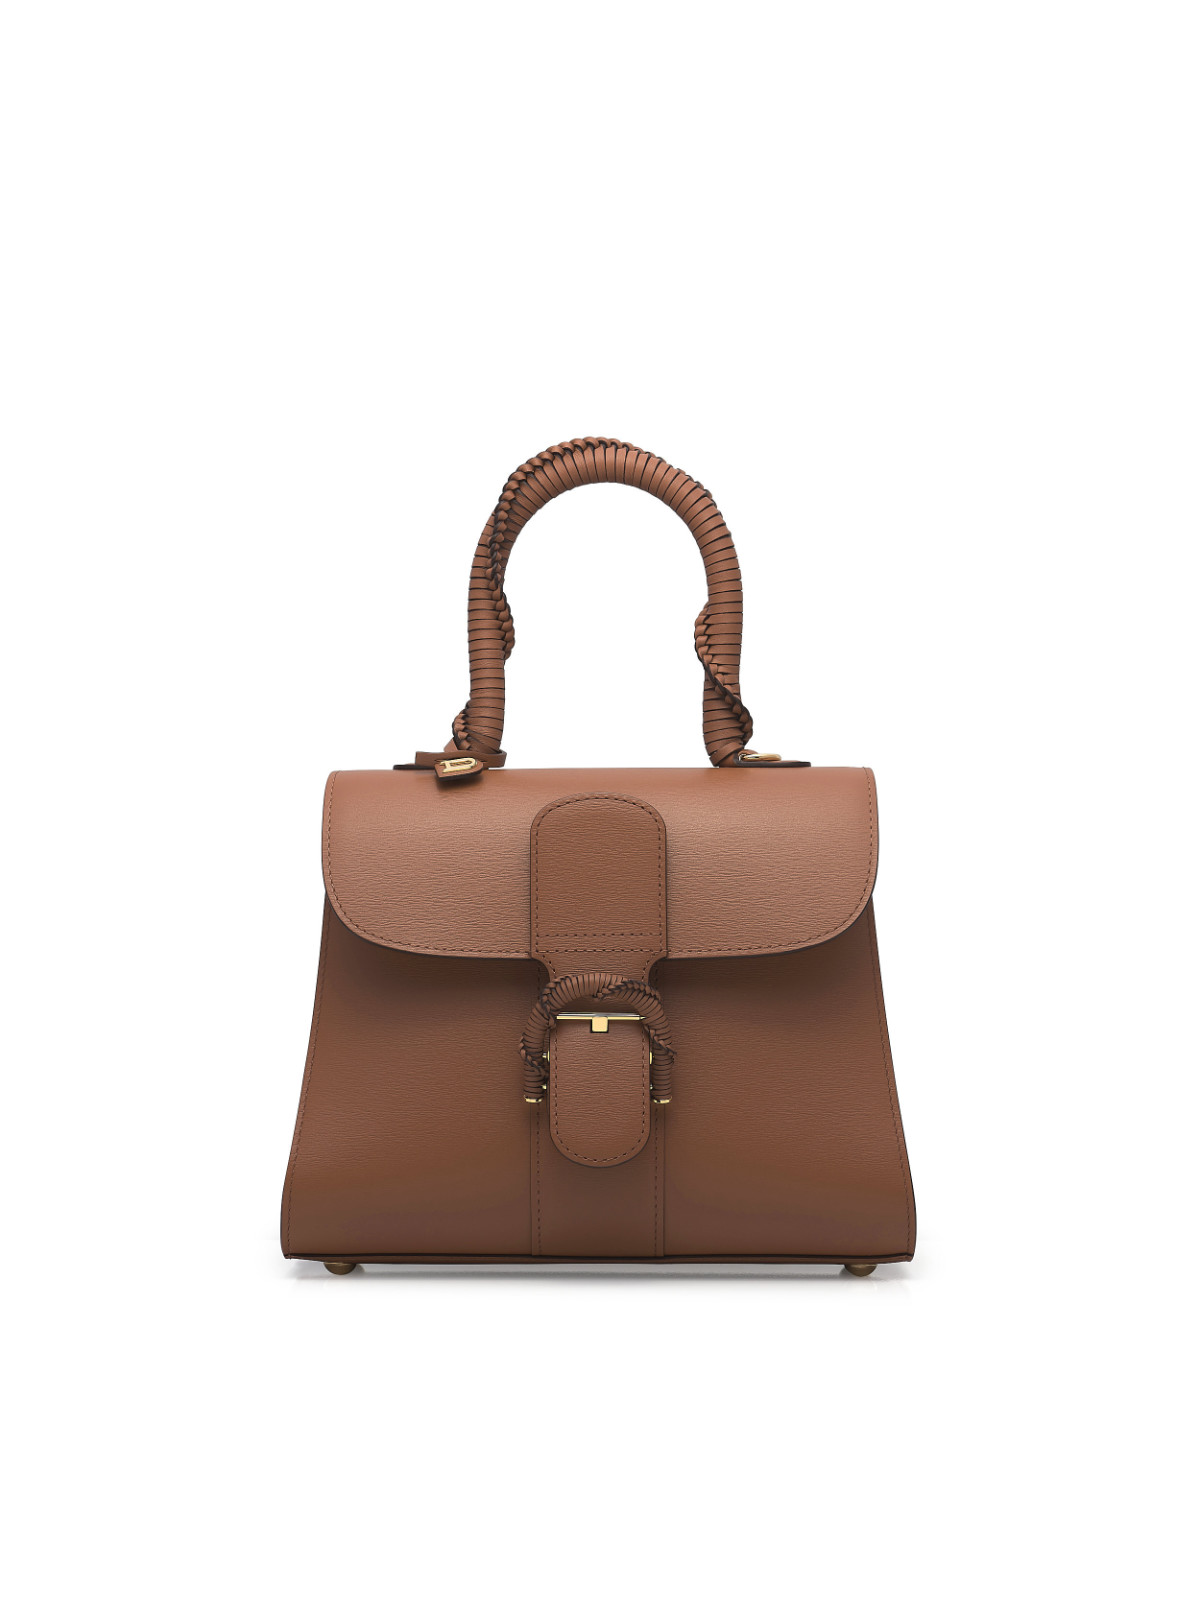 Delvaux: Leather Mastery at its most 'Brillant